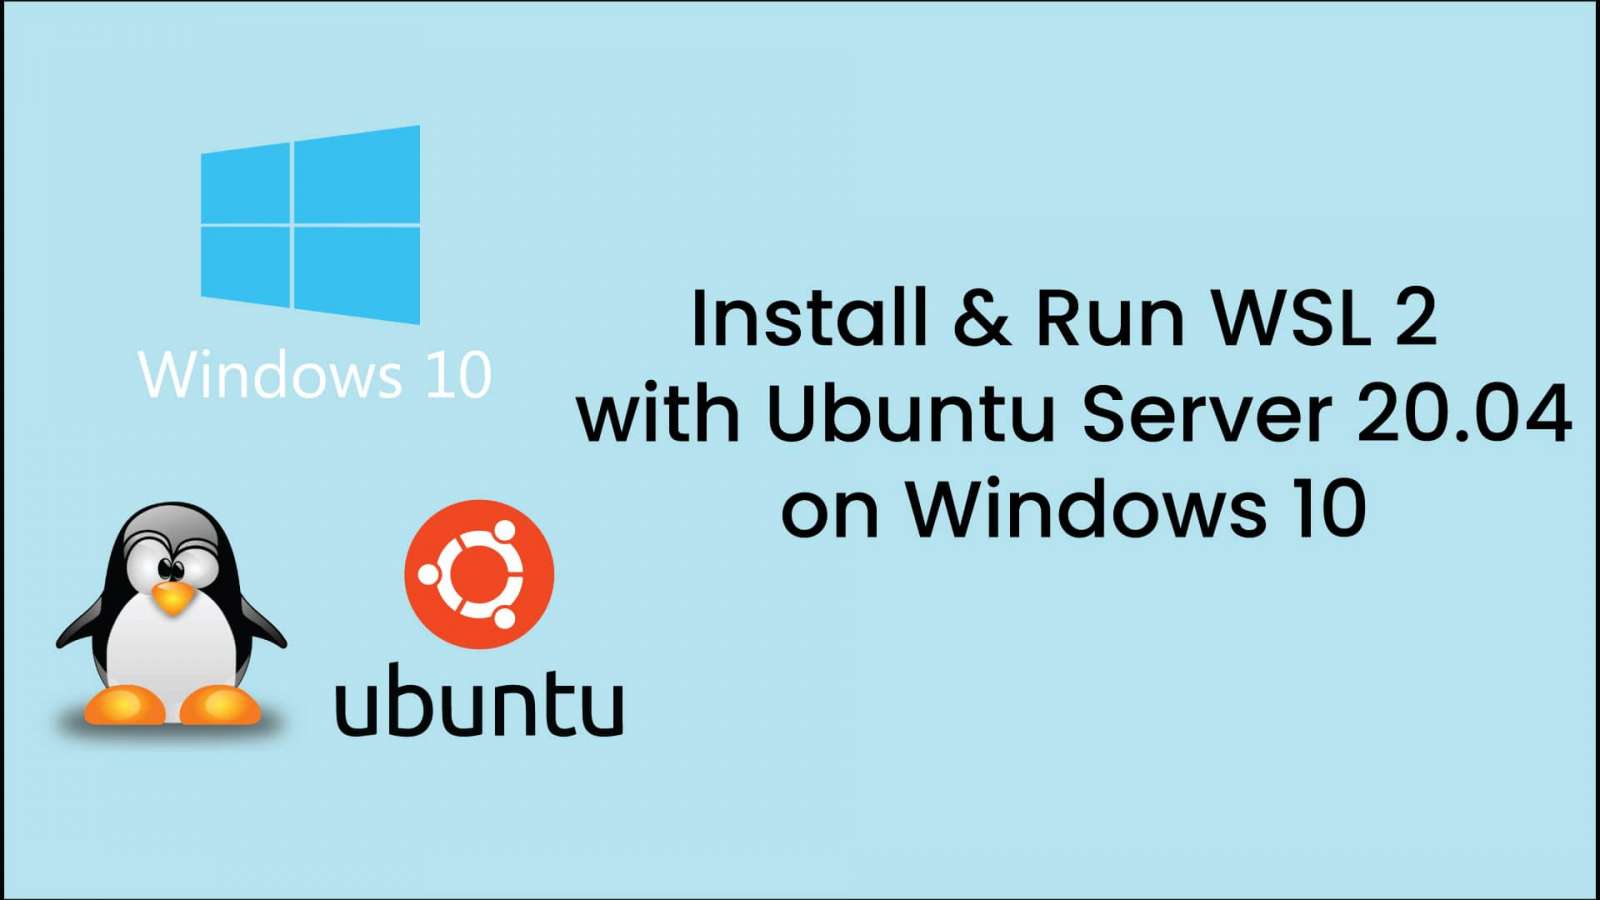 How to install and run WSL 2 with Ubuntu Server 20.04 on Windows 10